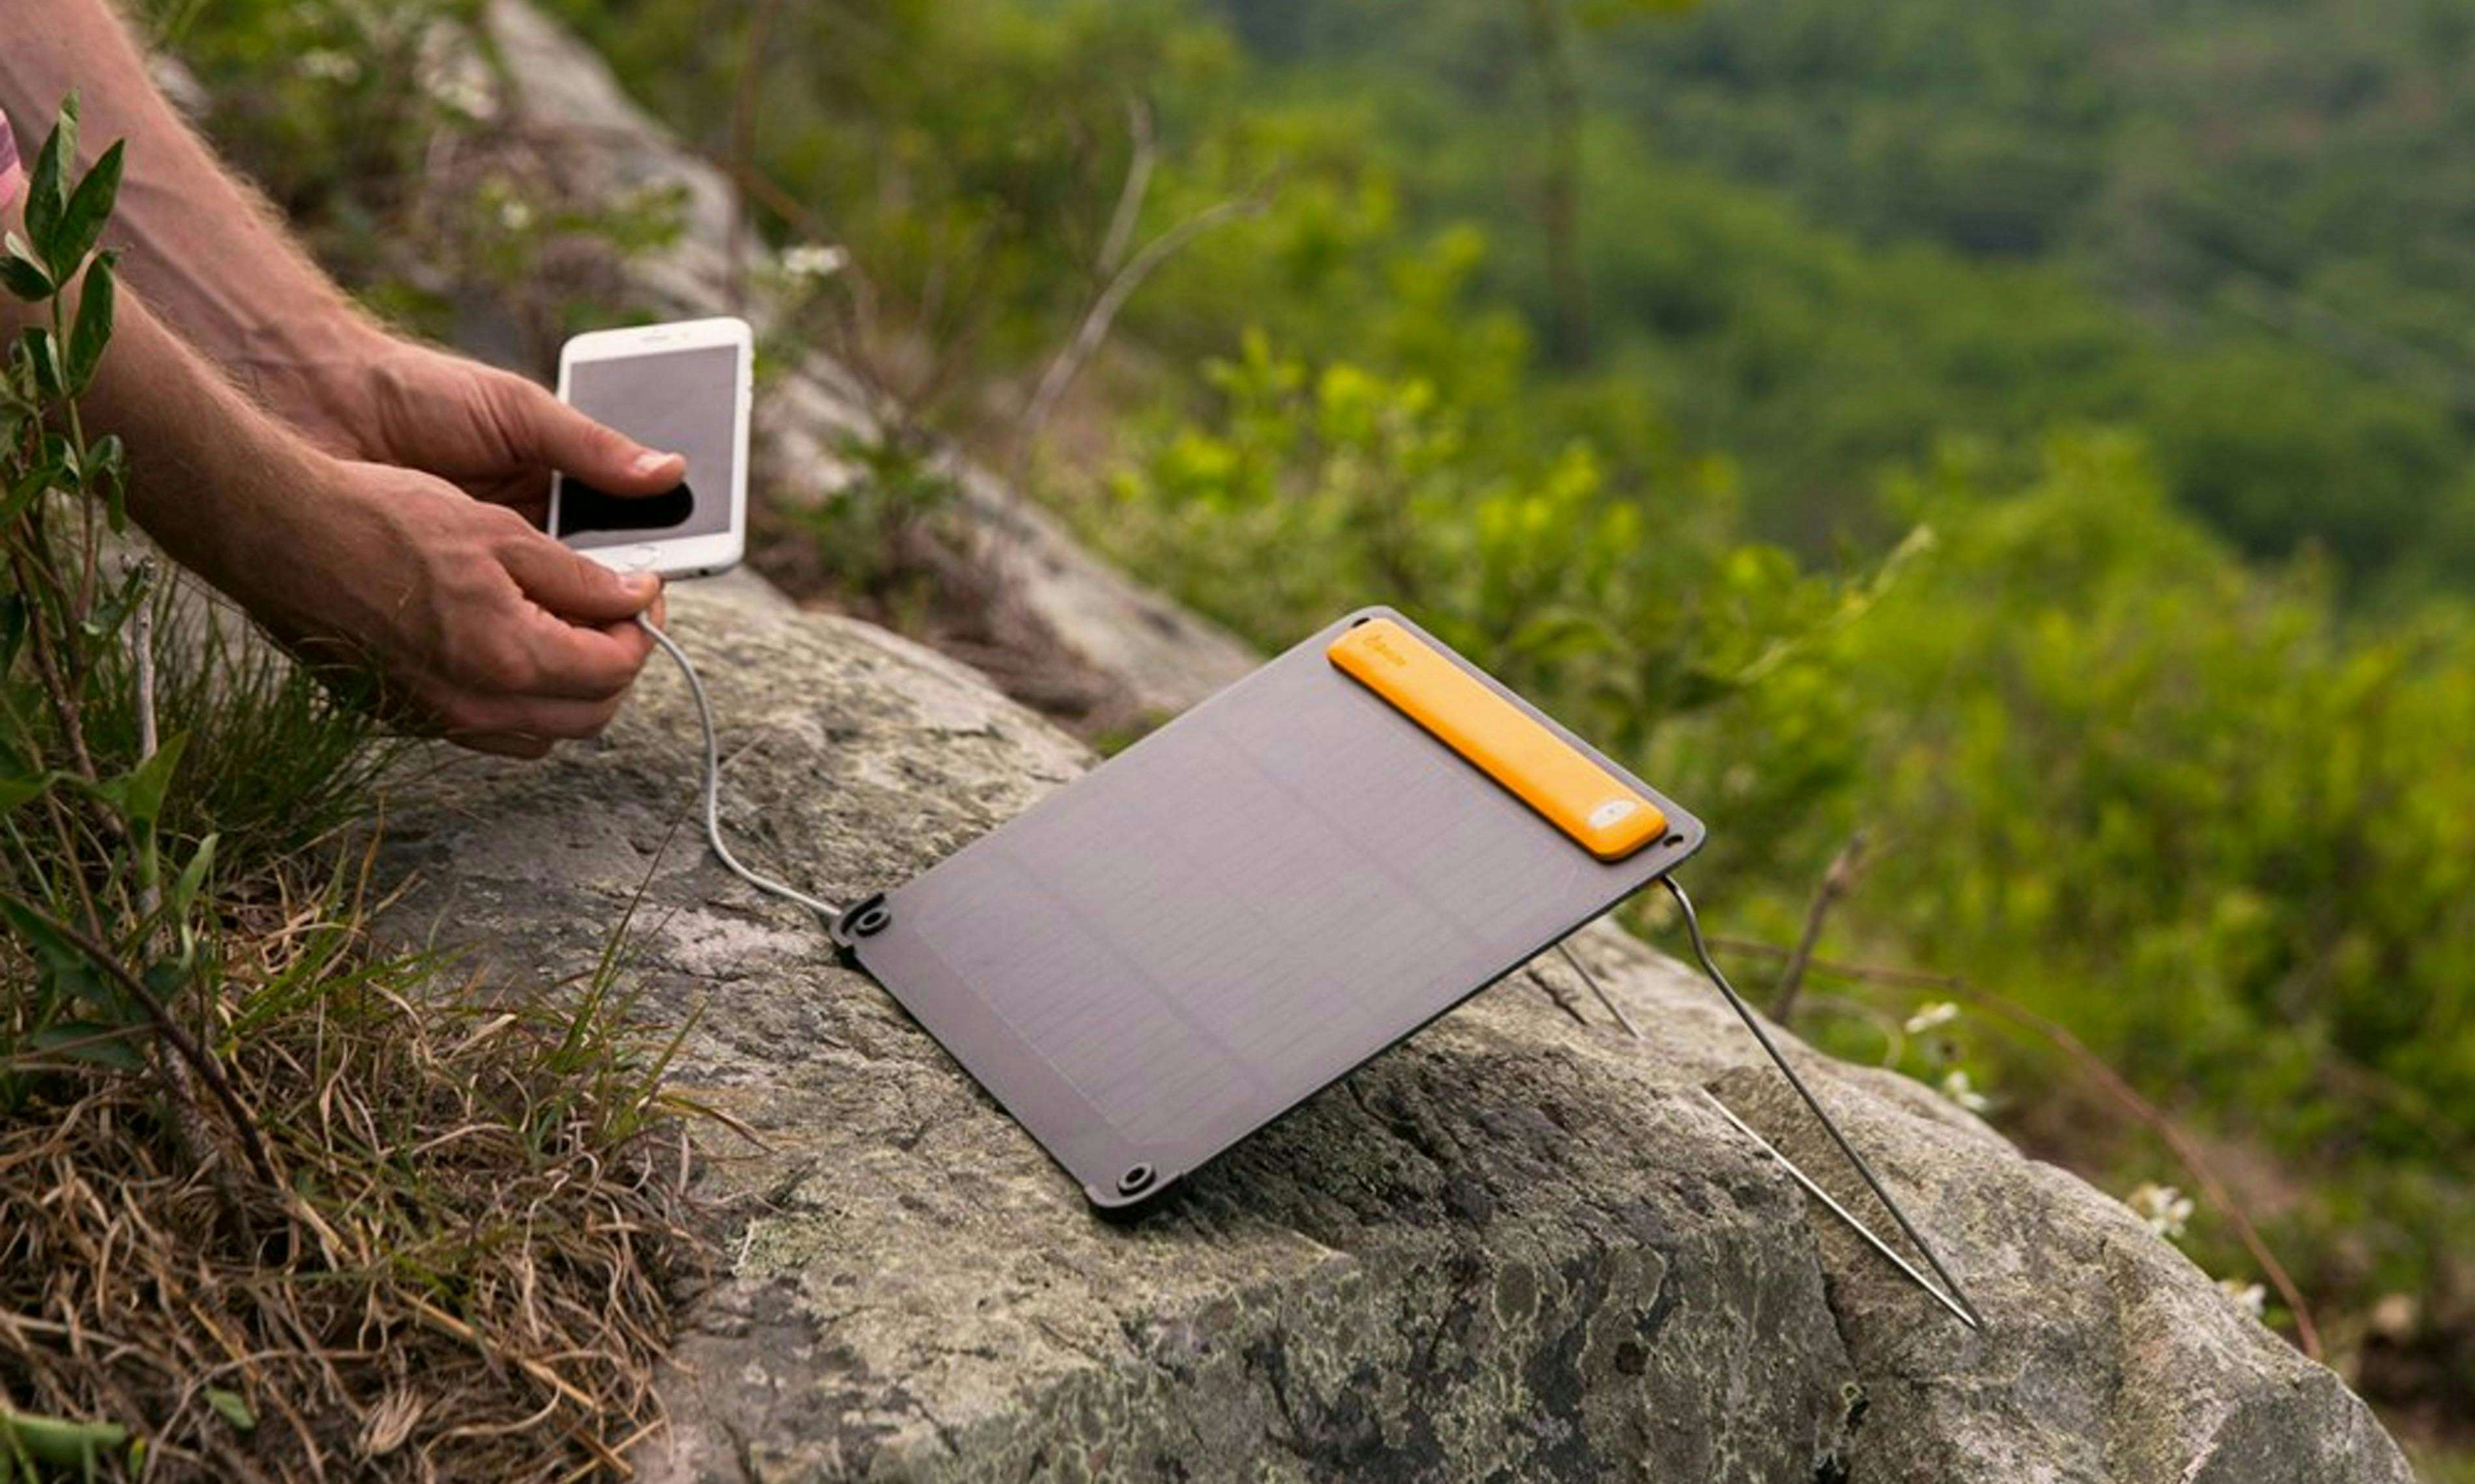 BioLite Solar Charger 5+ being used outside